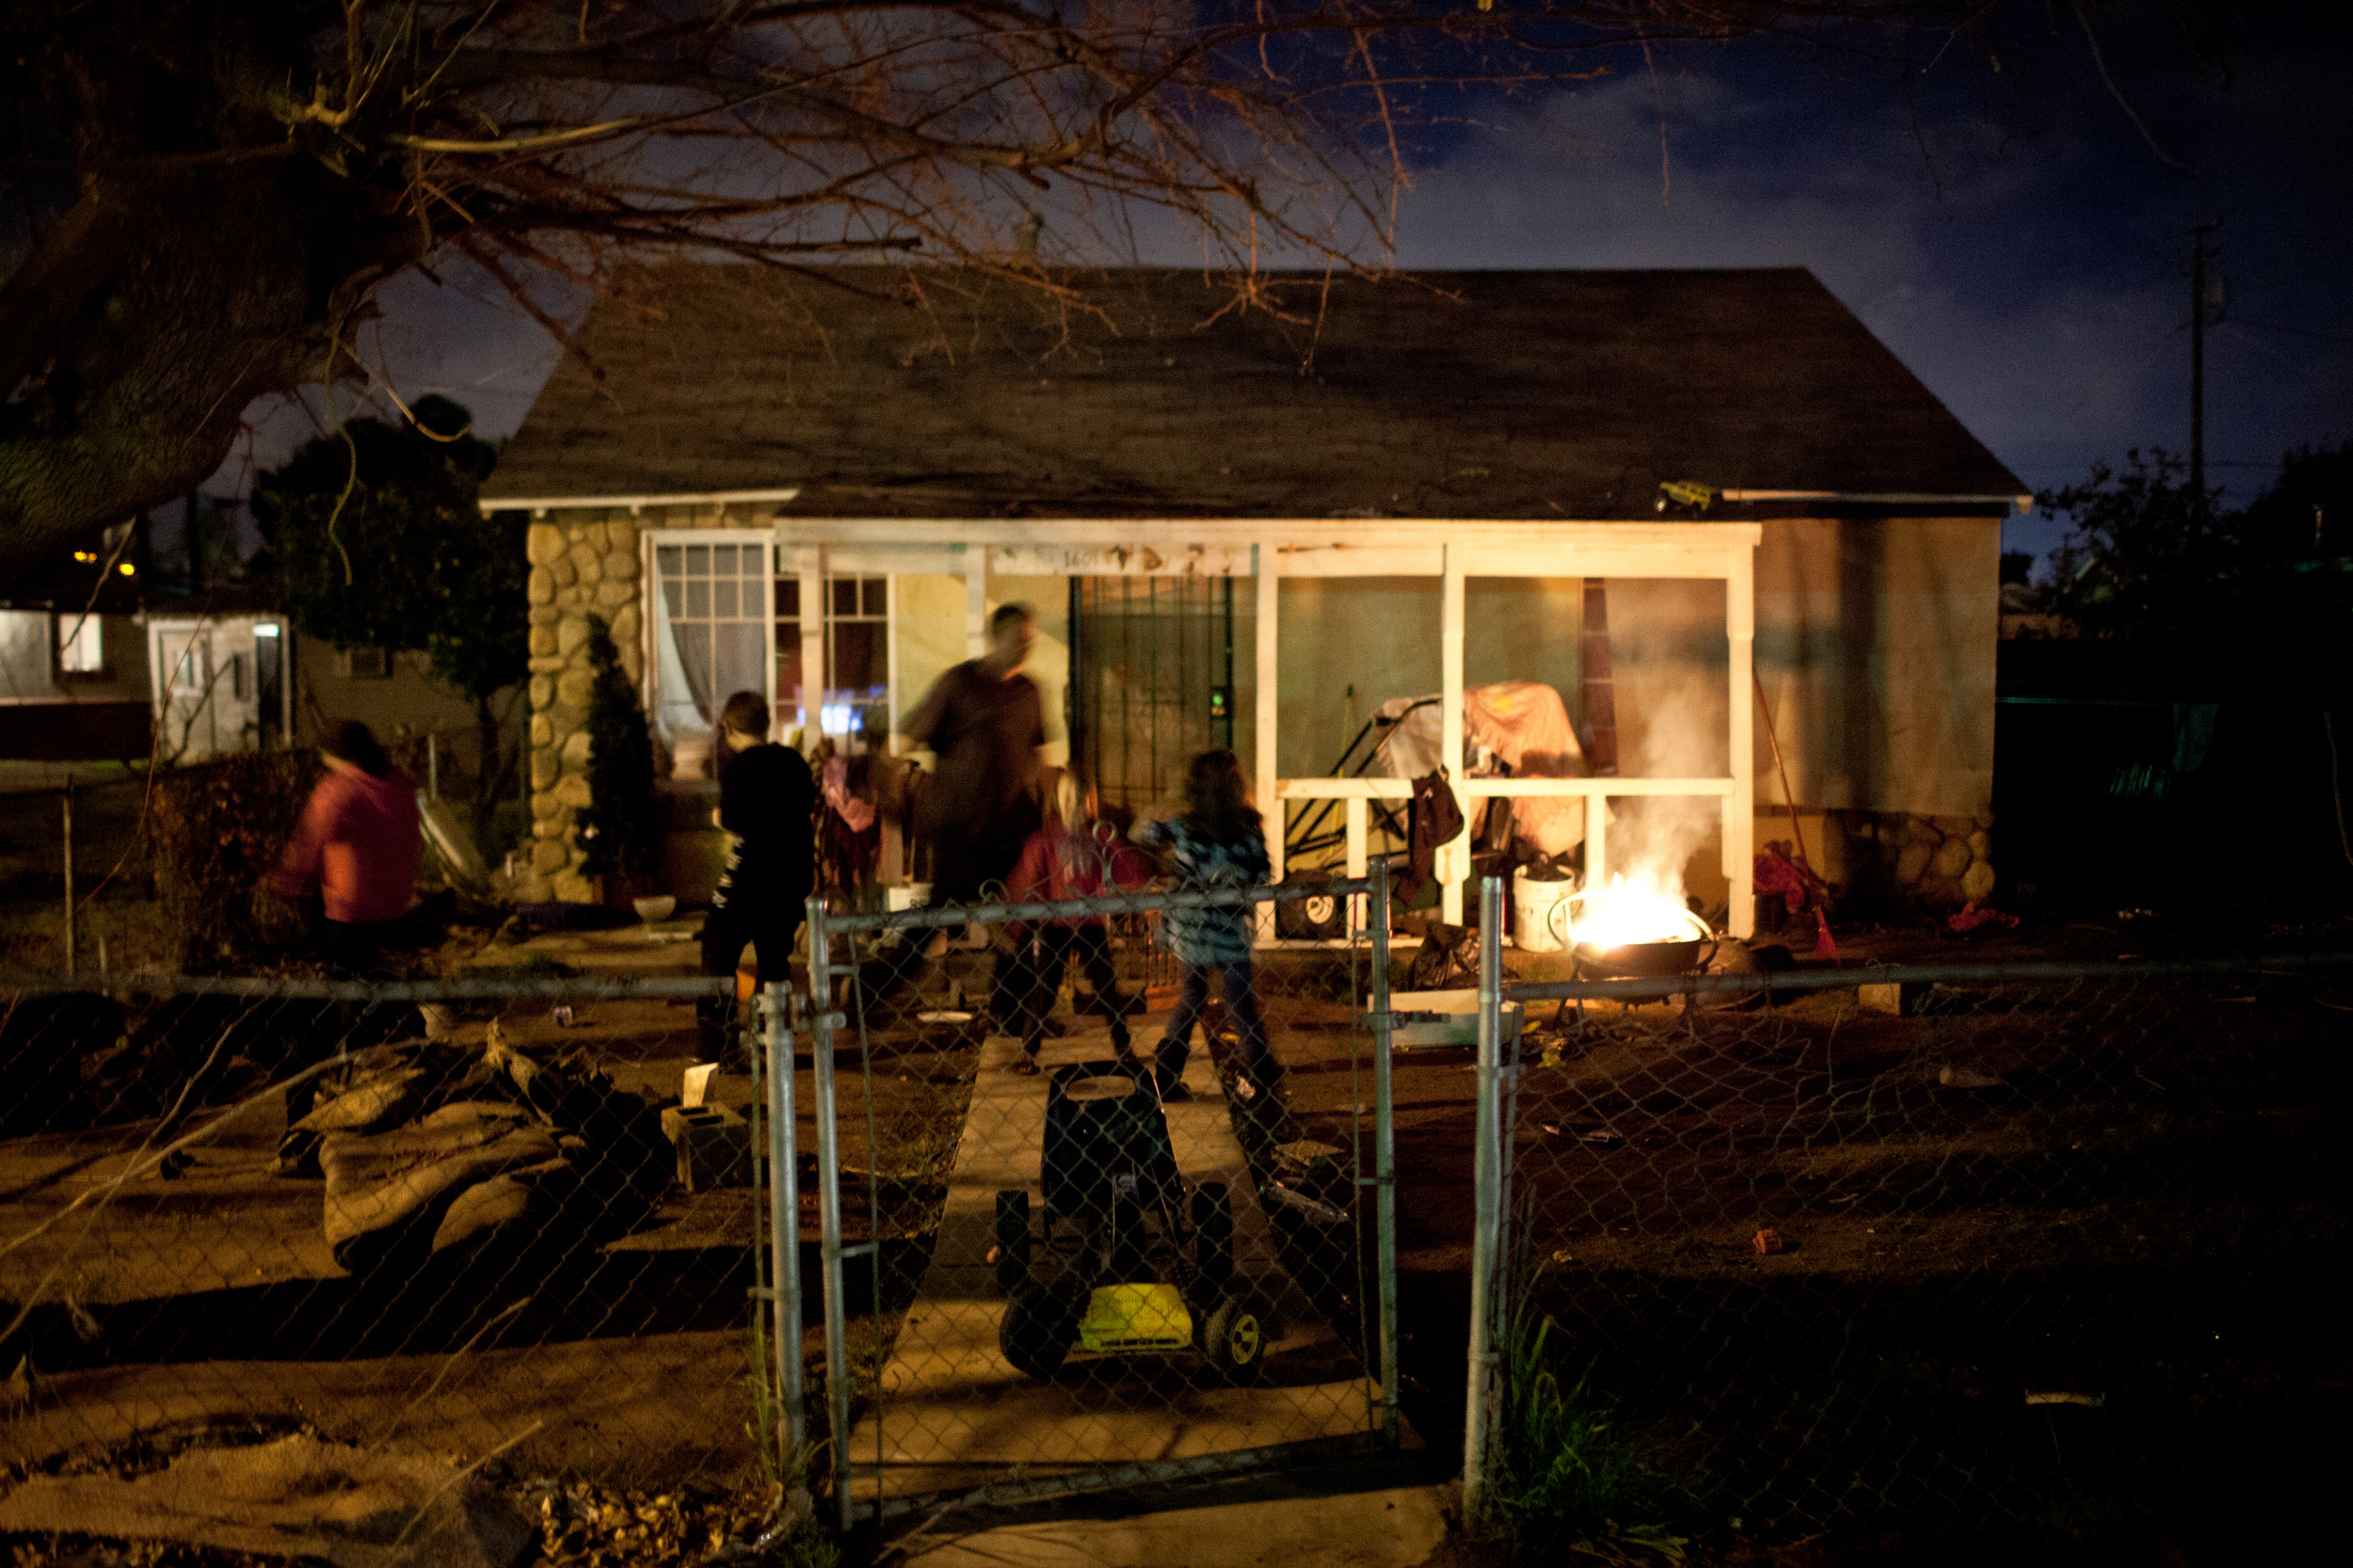  The Rutter family hangs out in front of their Parklawn home in Modesto, California. Across California there are hundreds of unincorporated communities like Parklawn. While a few are some of the state's richest areas; most lack sewer systems, clean d